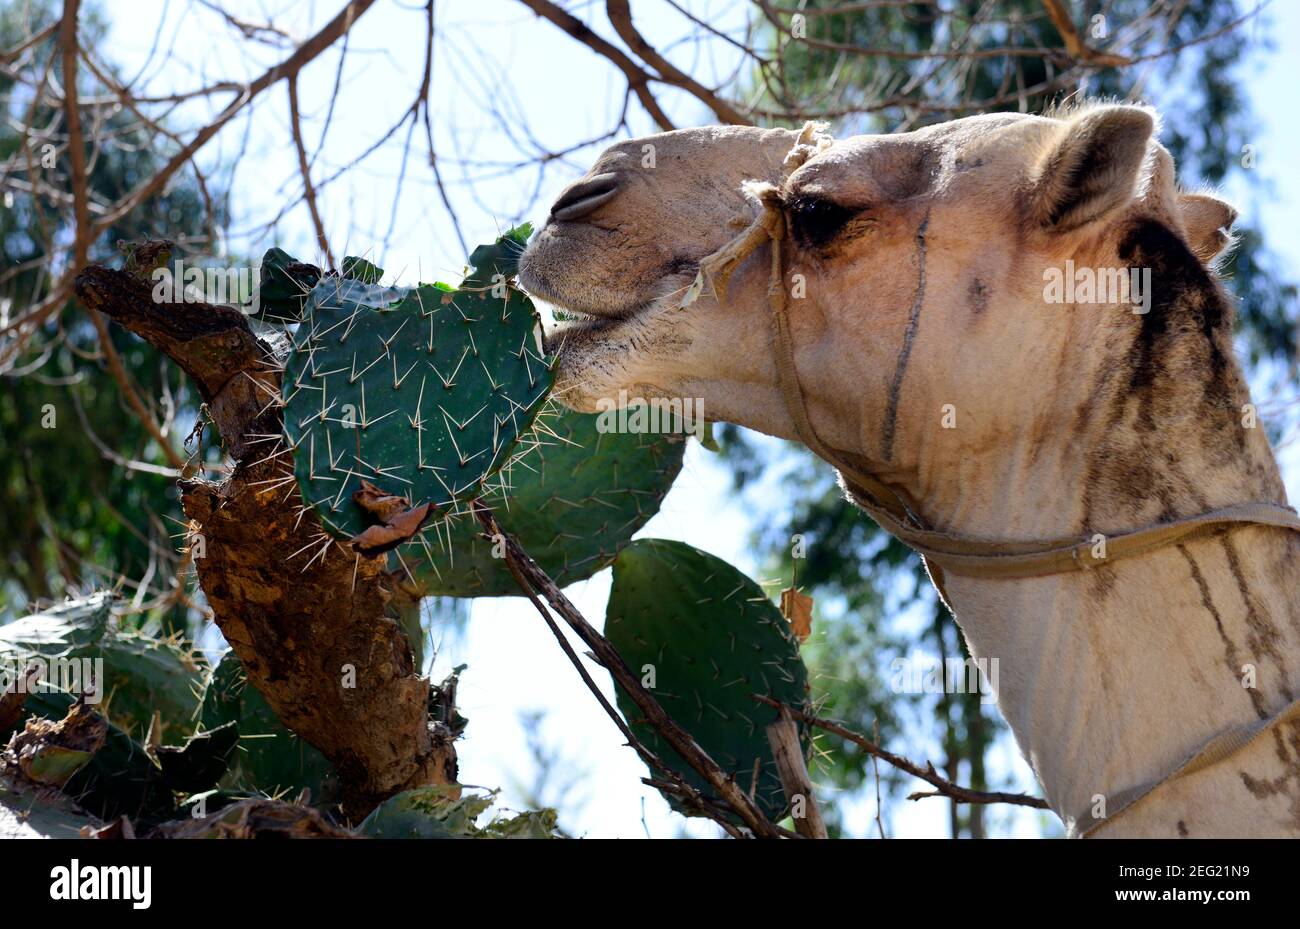 A camel eating prickly cactus in Tigray region in northern Ethiopia. Stock Photo